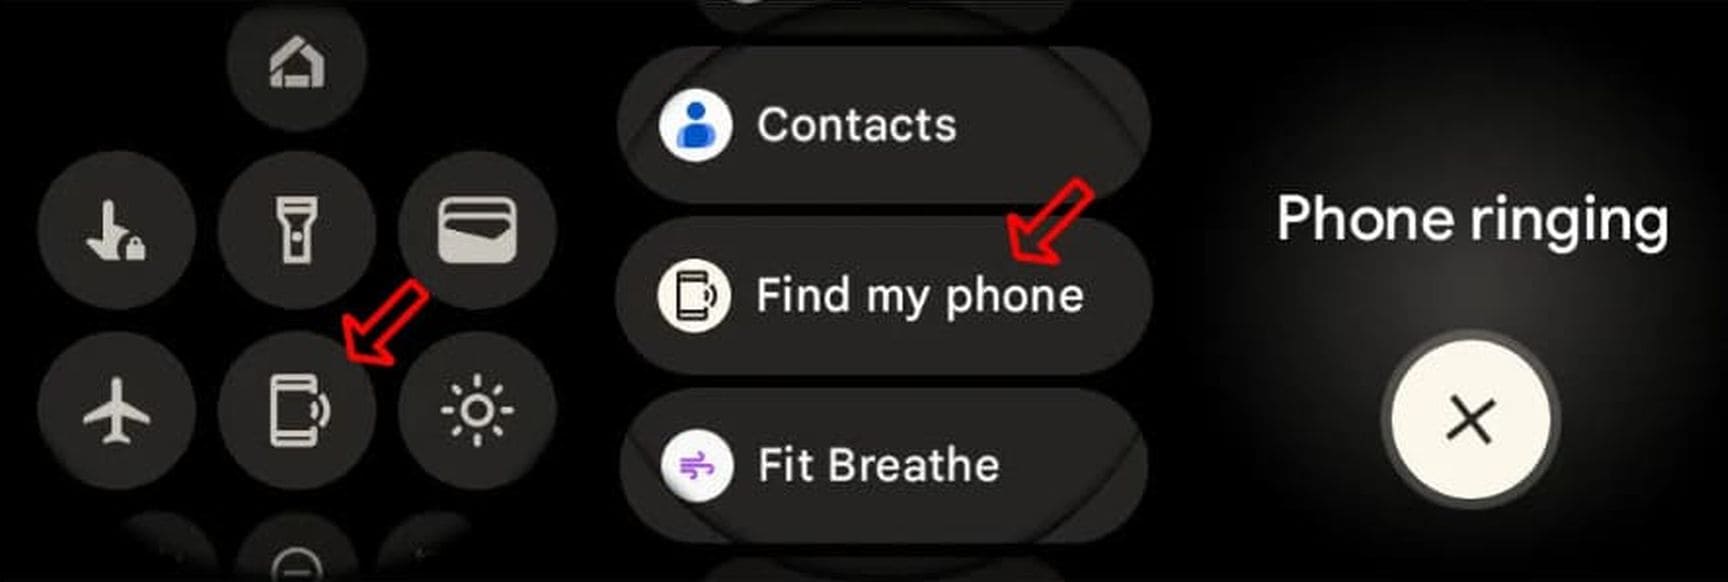 An image of how to find a Pixel phone_s location using Pixel watch